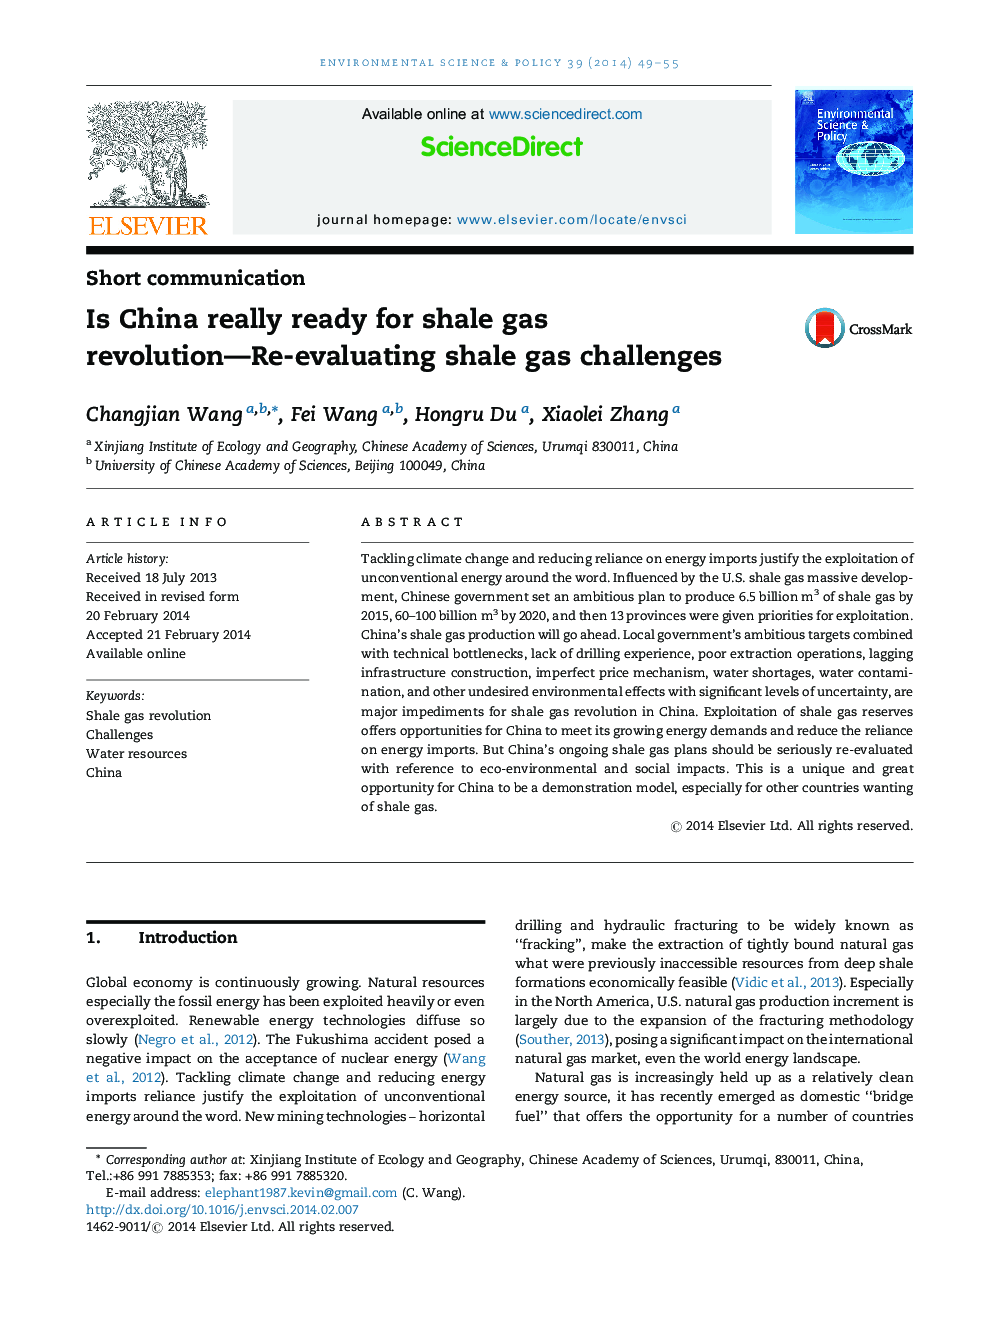 Is China really ready for shale gas revolution-Re-evaluating shale gas challenges